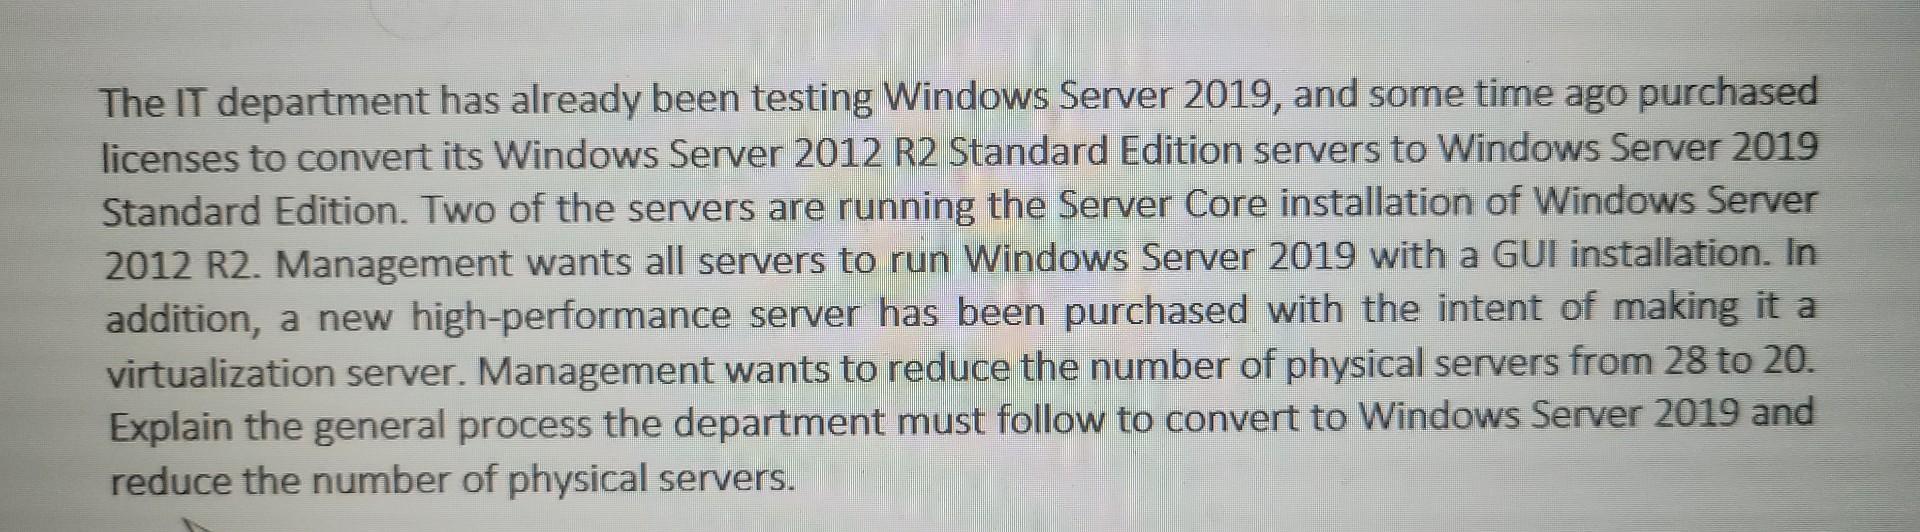 The IT department has already been testing Windows Server 2019, and some time ago purchased licenses to